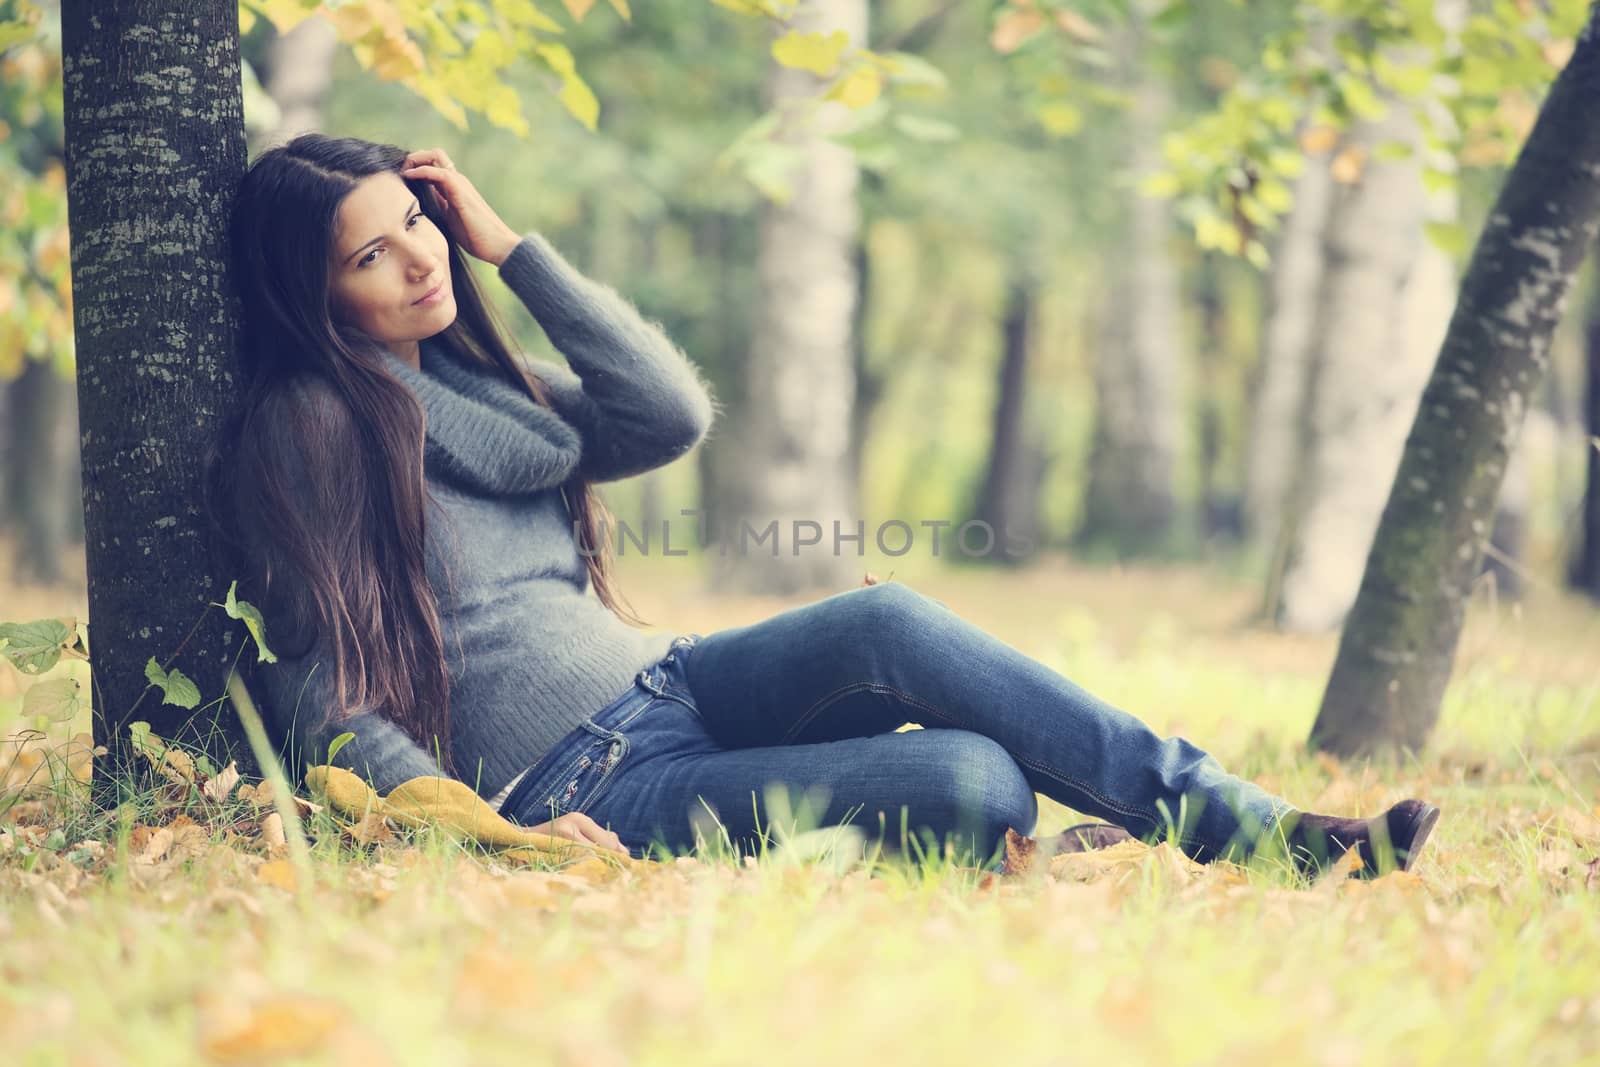 Beautiful brunette woman sitting under the tree in autumn park